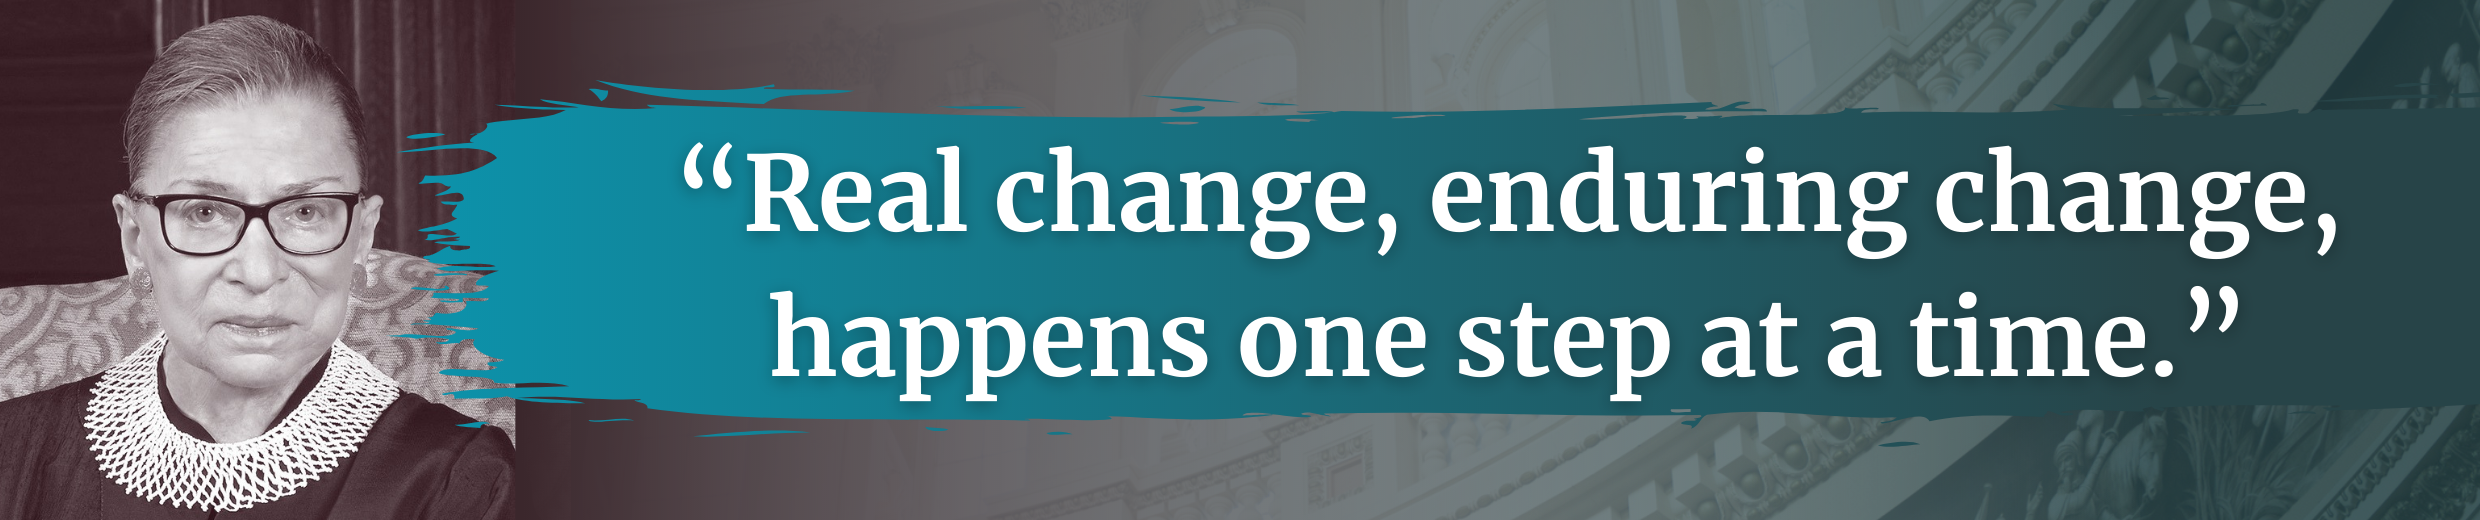 "Real change, enduring change, happens one step at a time."